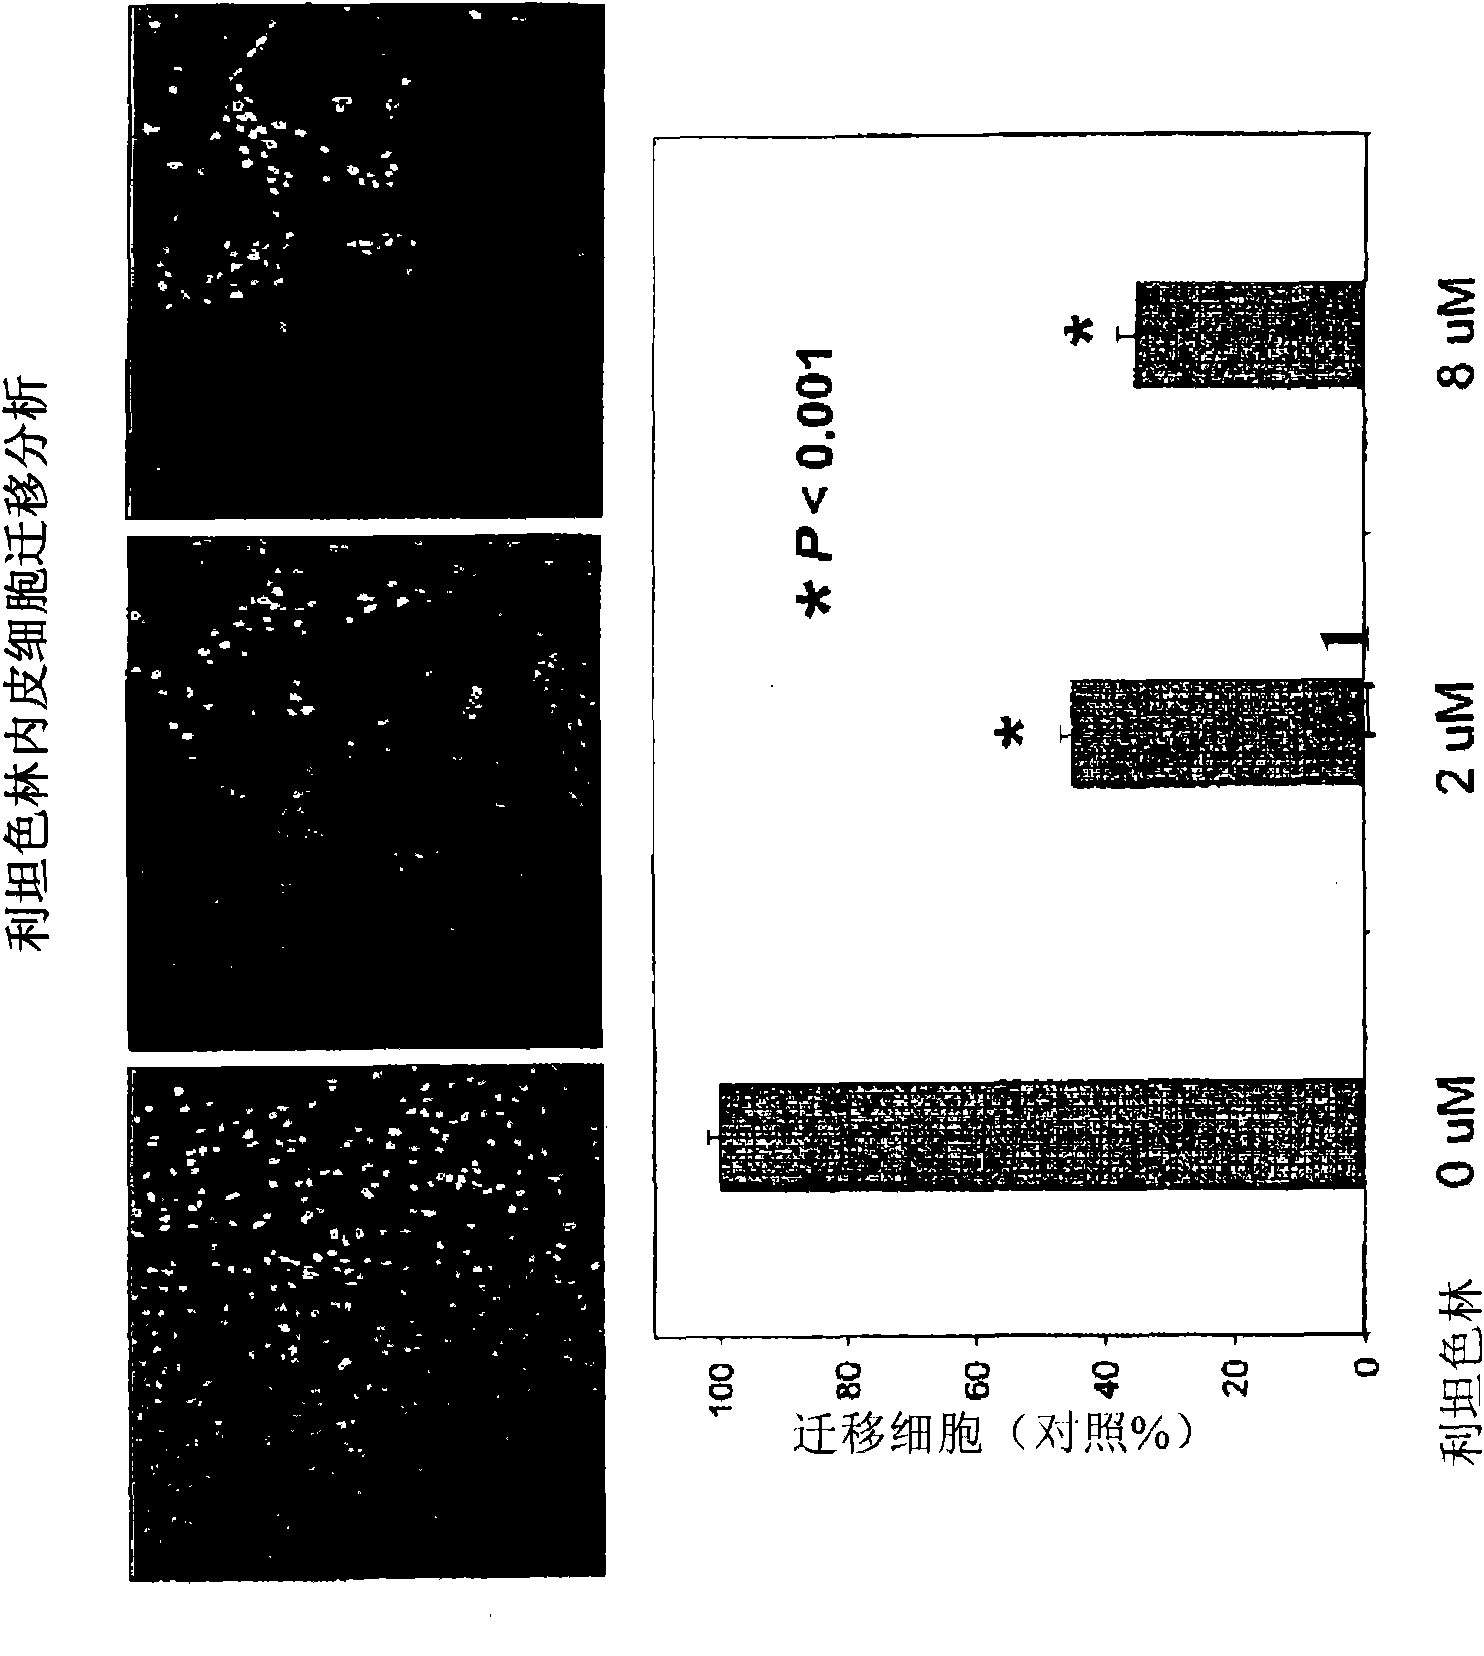 Anti-angiogenic agents and methods of use